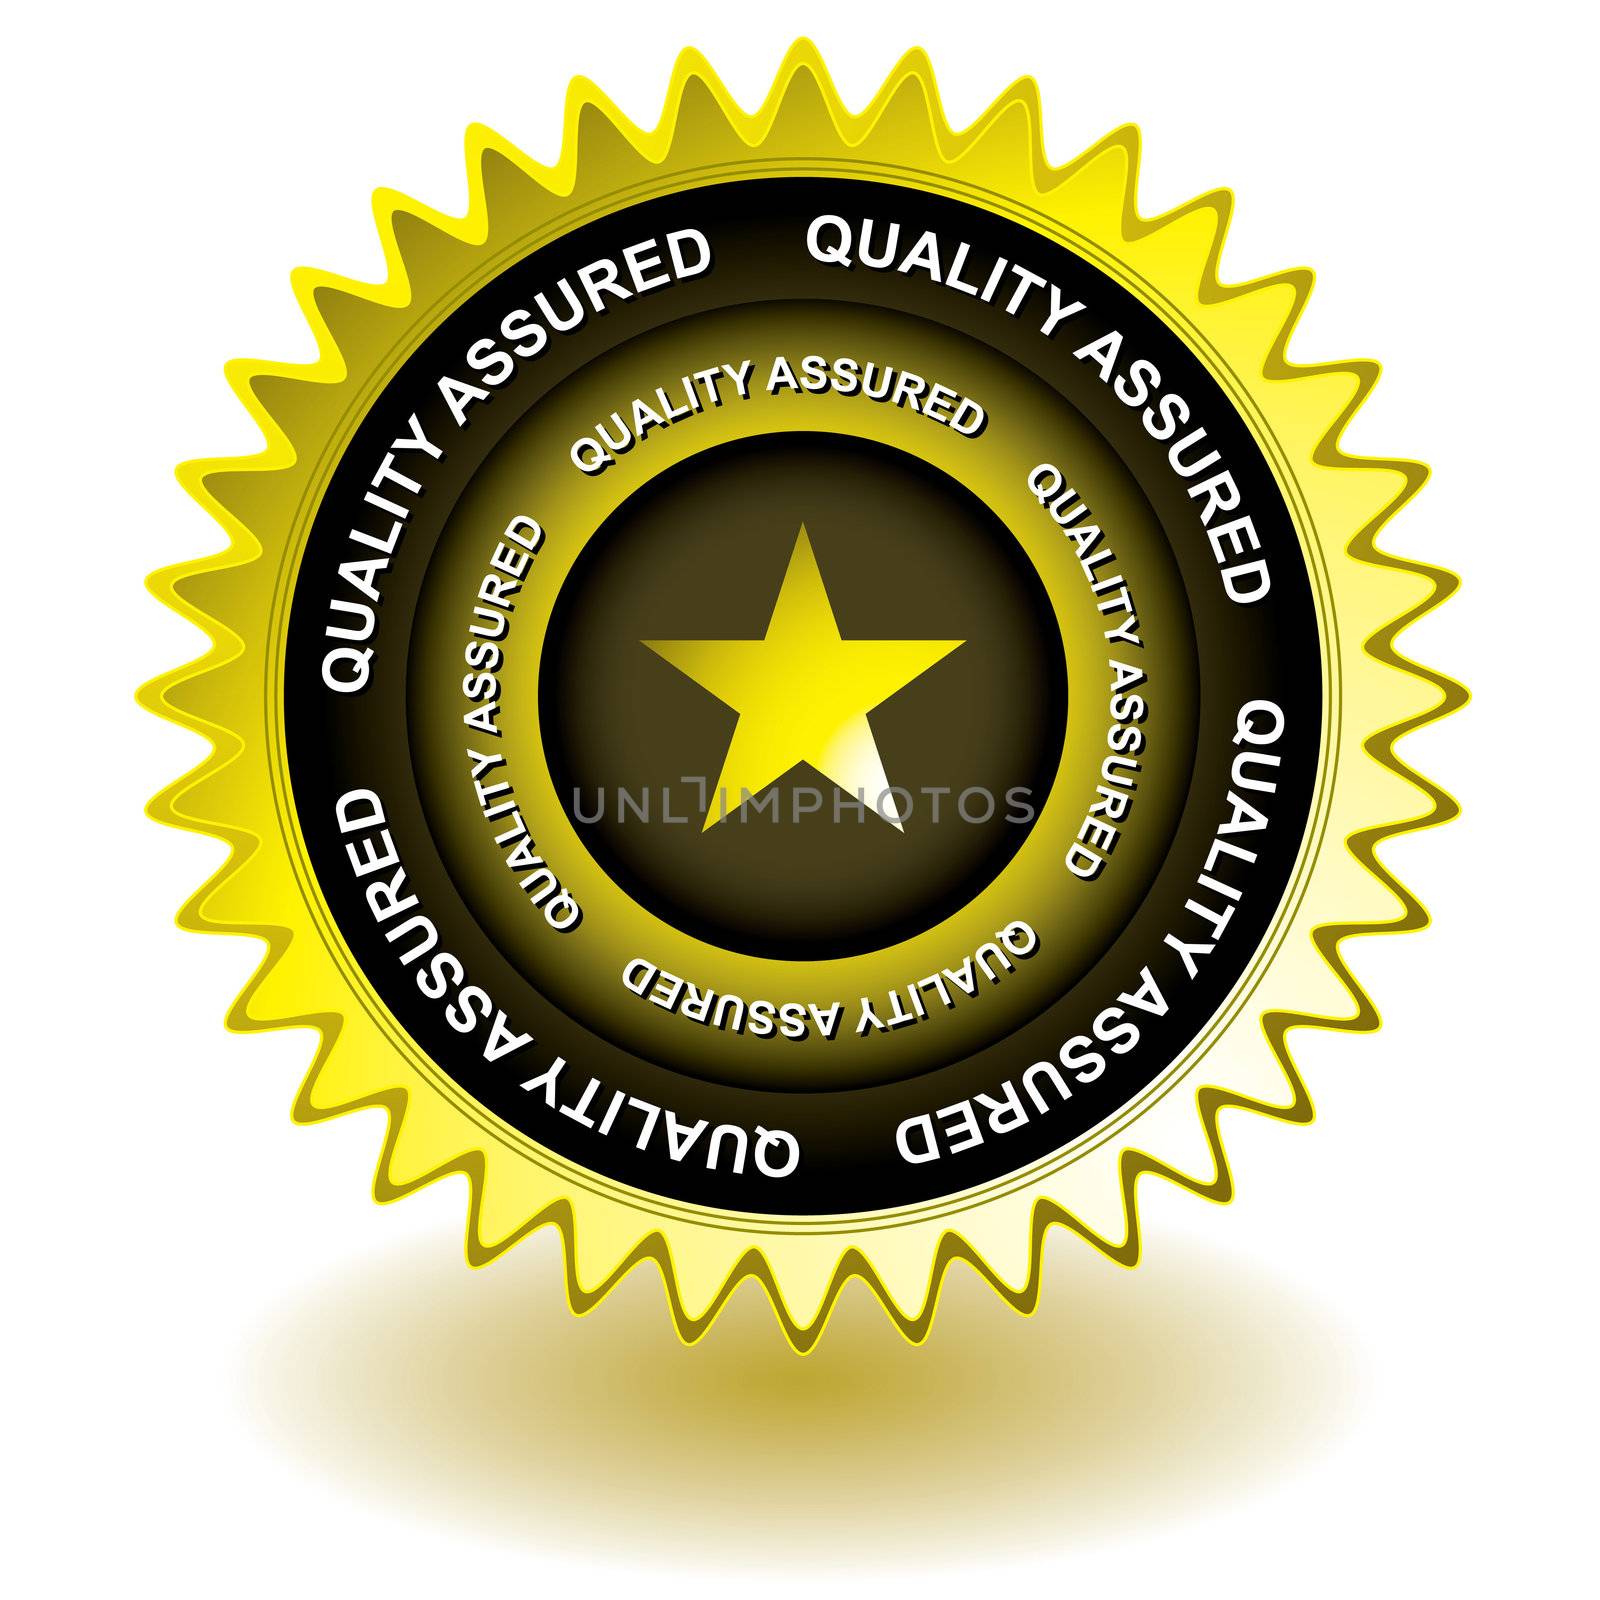 Golden web award or icon with quality assured text and shadow